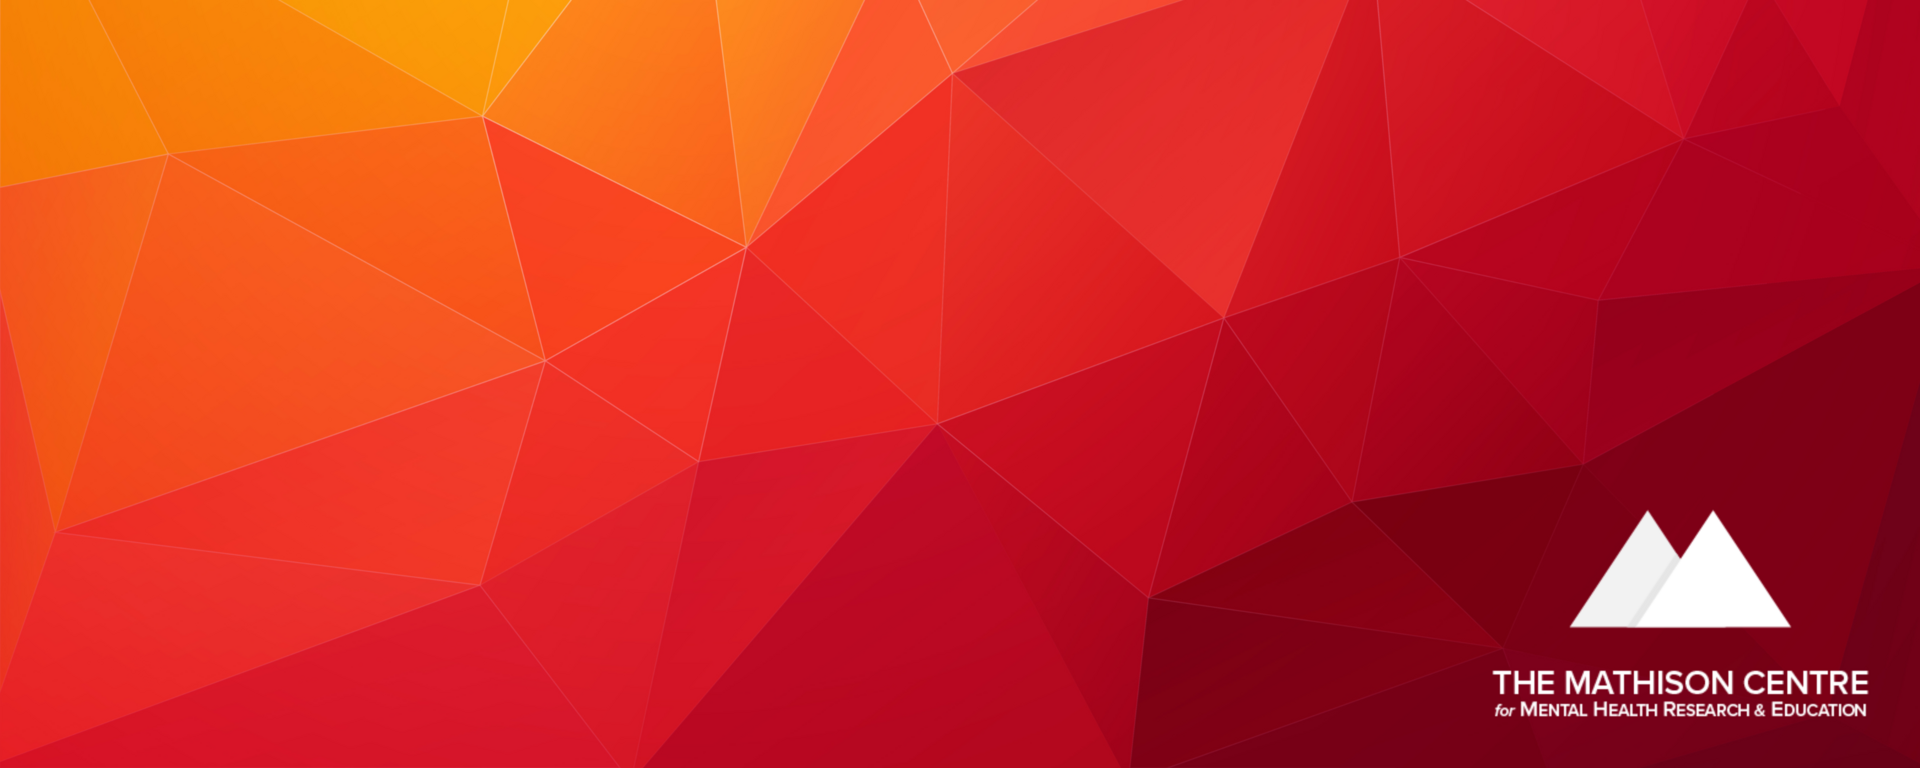 Orange geometric background with white logo for The Mathison Centre in the bottom right.